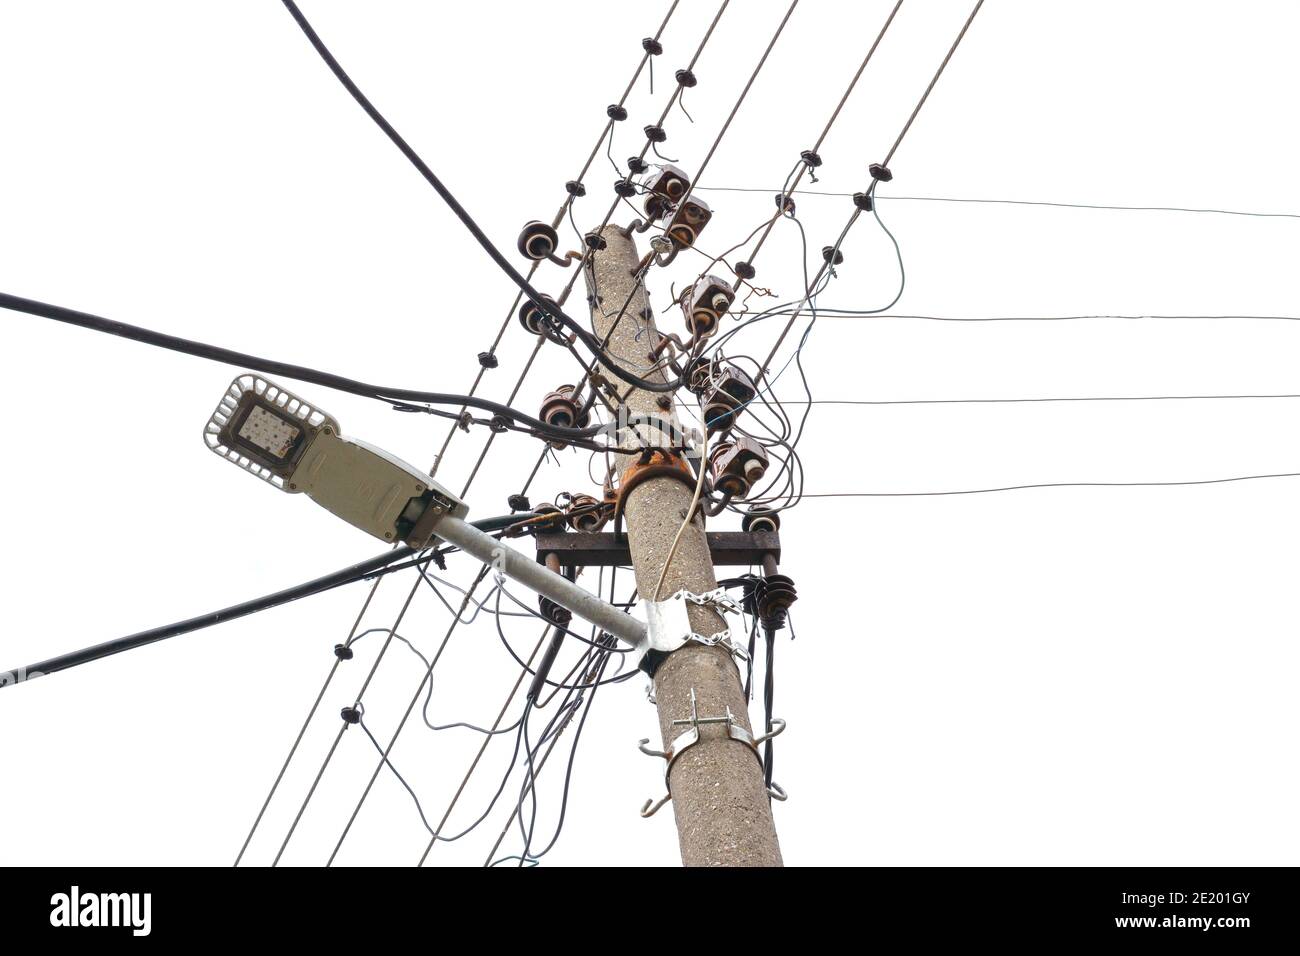 Many electric wires on concrete street pole with internet or cell phone communication box. Stock Photo